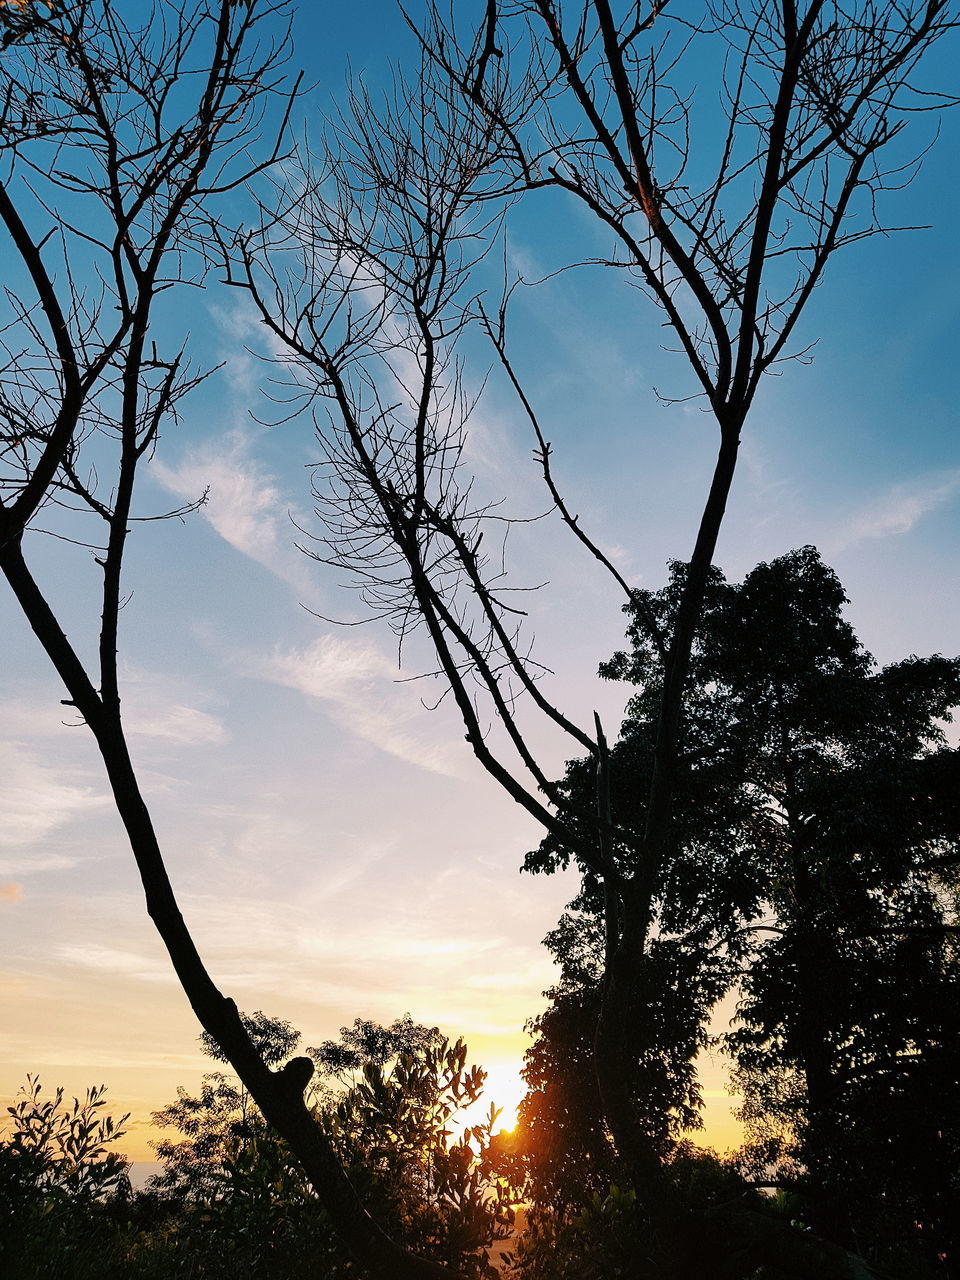 tree, sky, plant, silhouette, sunset, beauty in nature, cloud - sky, scenics - nature, branch, tranquility, nature, tranquil scene, no people, bare tree, growth, non-urban scene, outdoors, idyllic, low angle view, sunlight